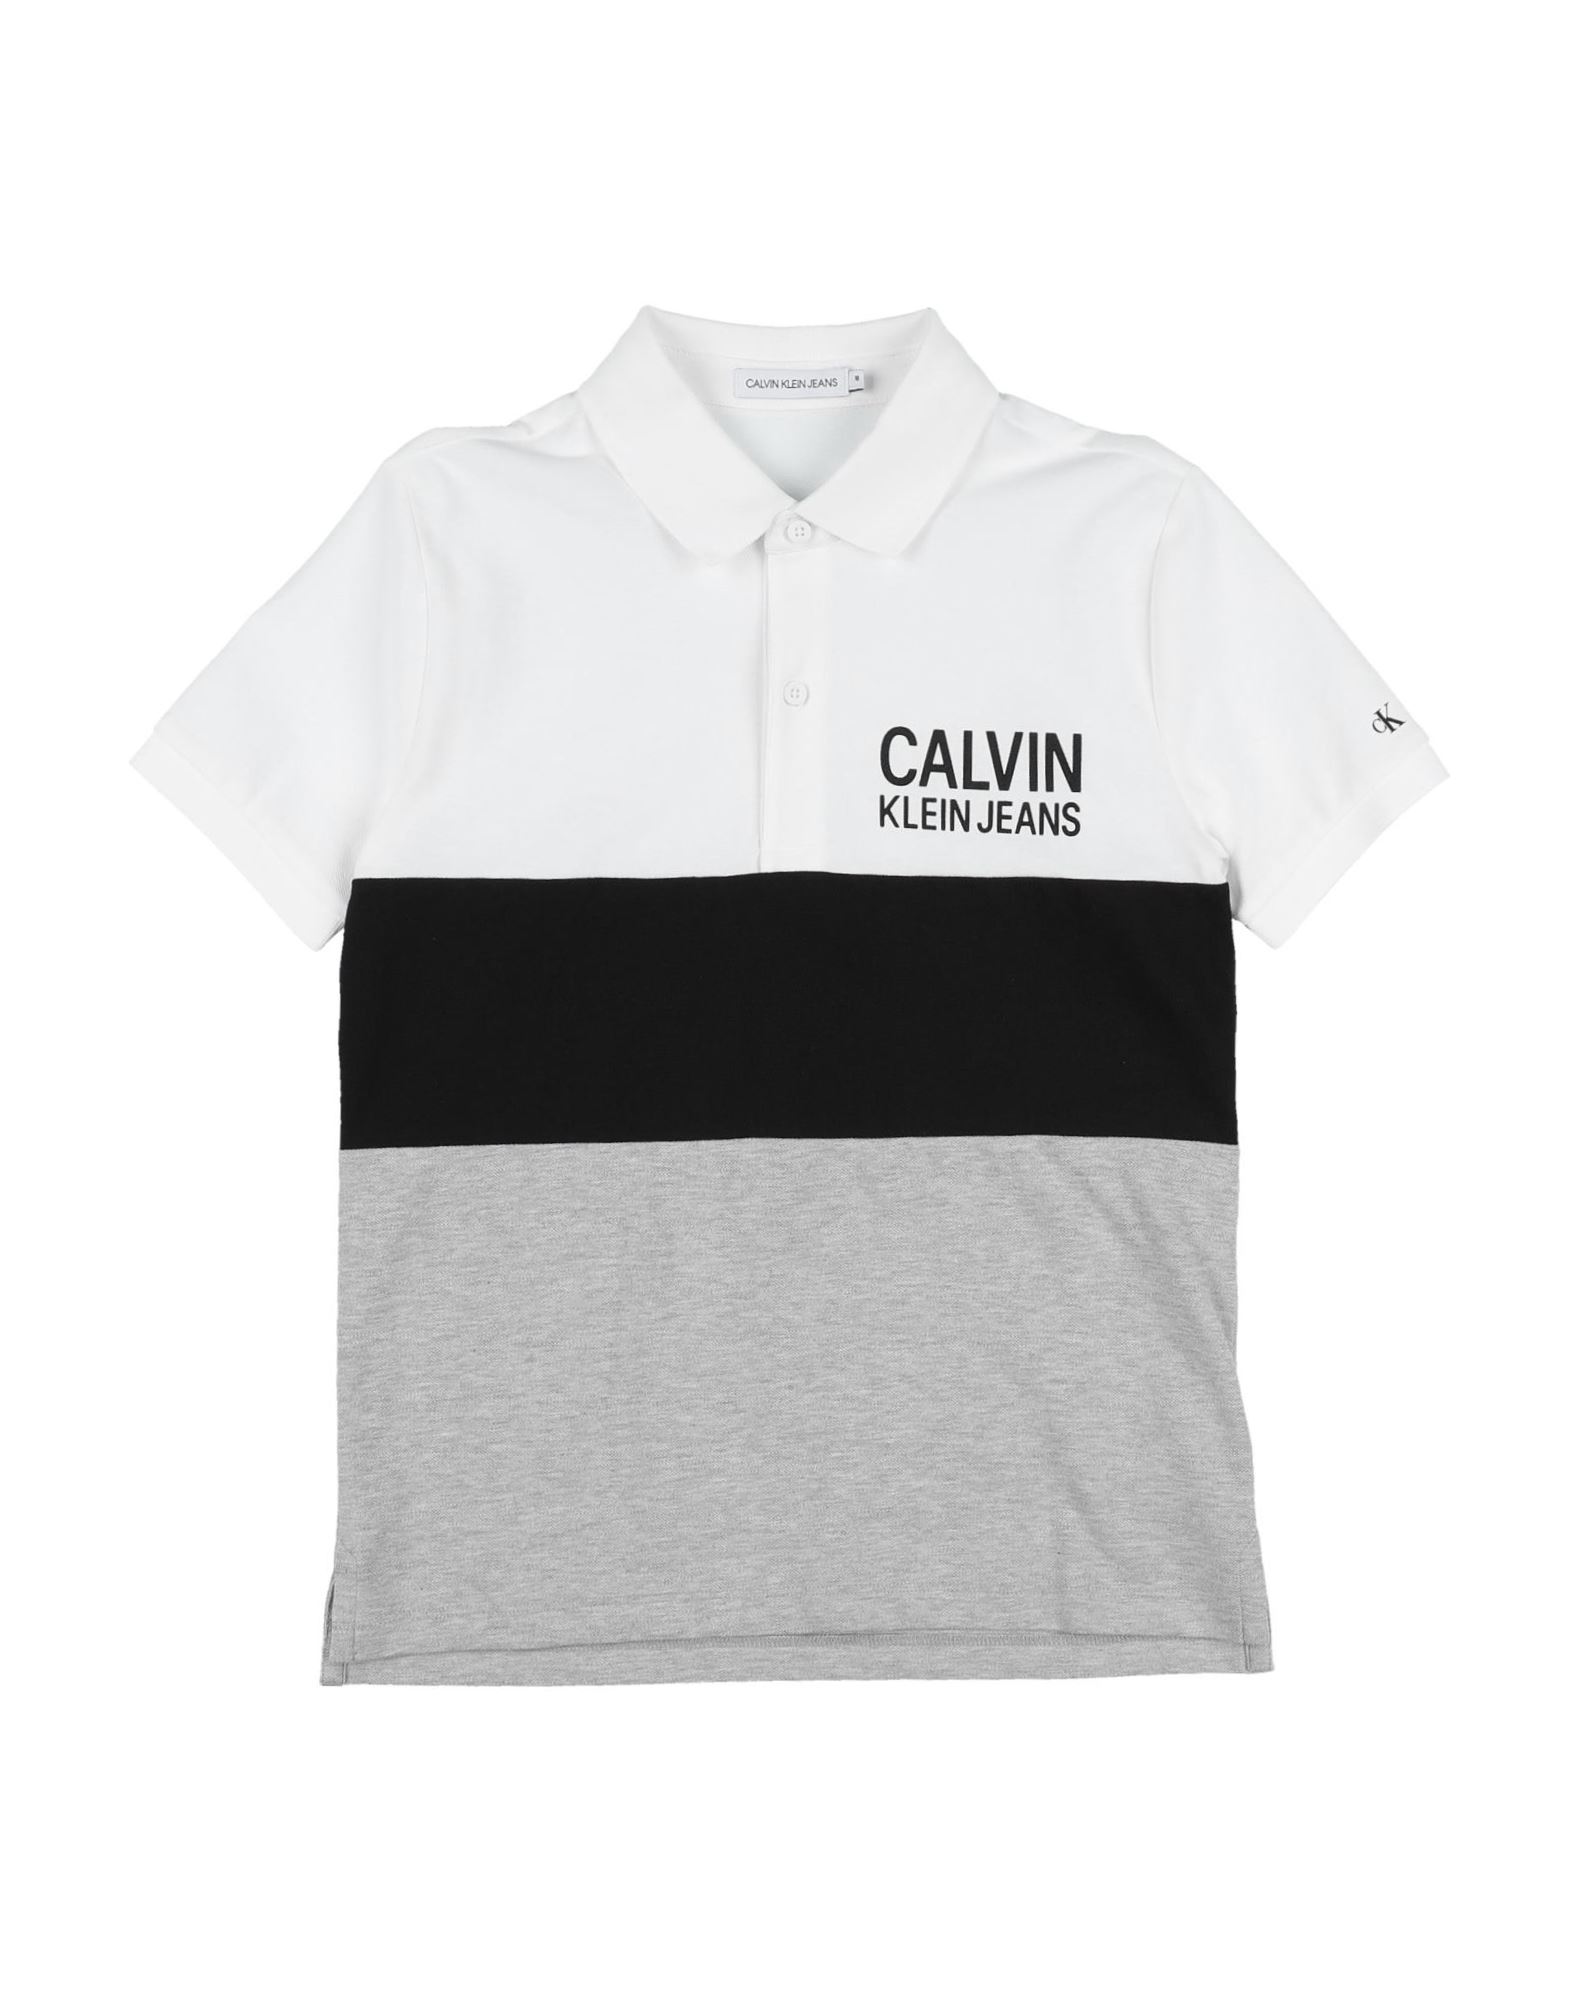 ＜YOOX＞ ★42%OFF！CALVIN KLEIN JEANS ボーイズ 3-8 歳 ポロシャツ ホワイト 6 コットン 94% / ポリウレタン 6%画像